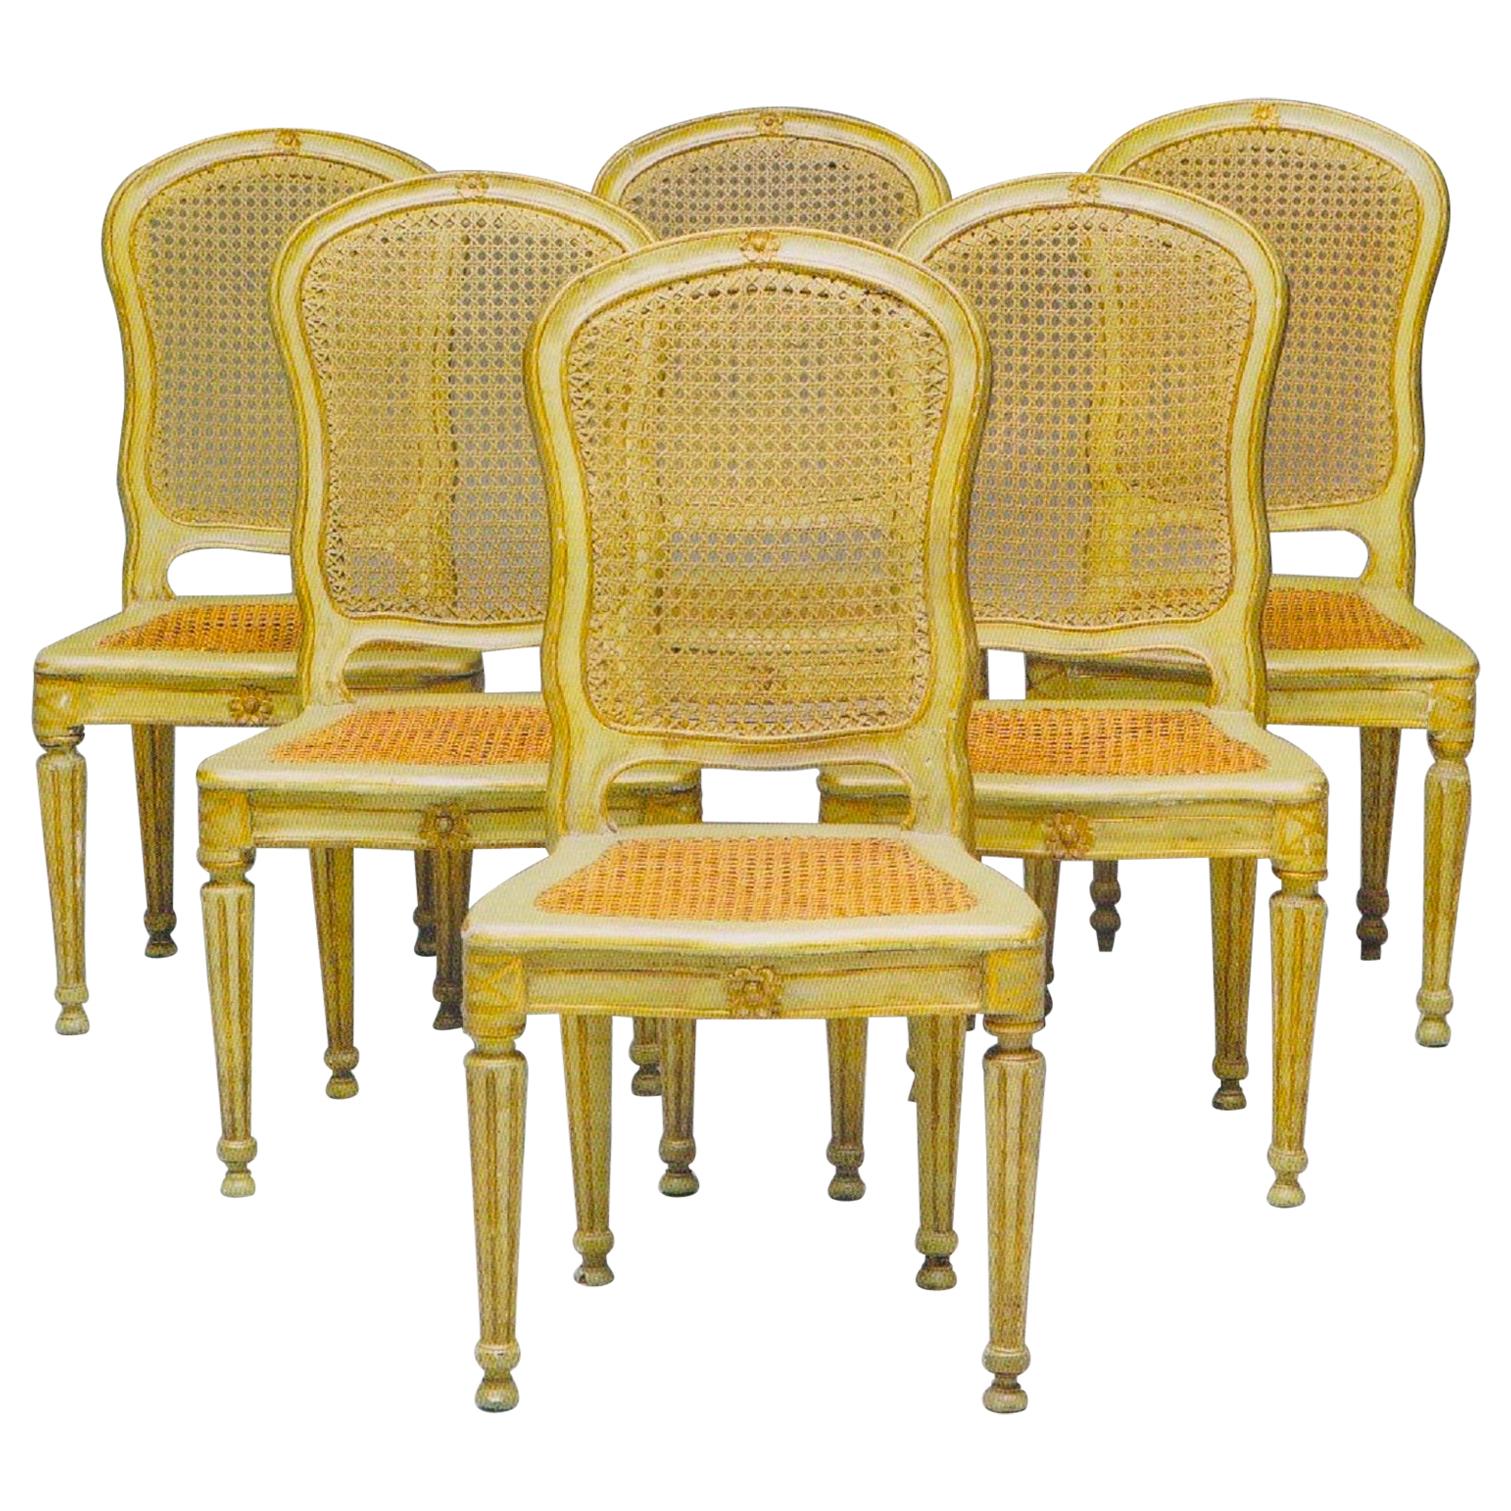 Fine Set of Six Italian, 18th Century Painted and Parcel-Gilt Chairs